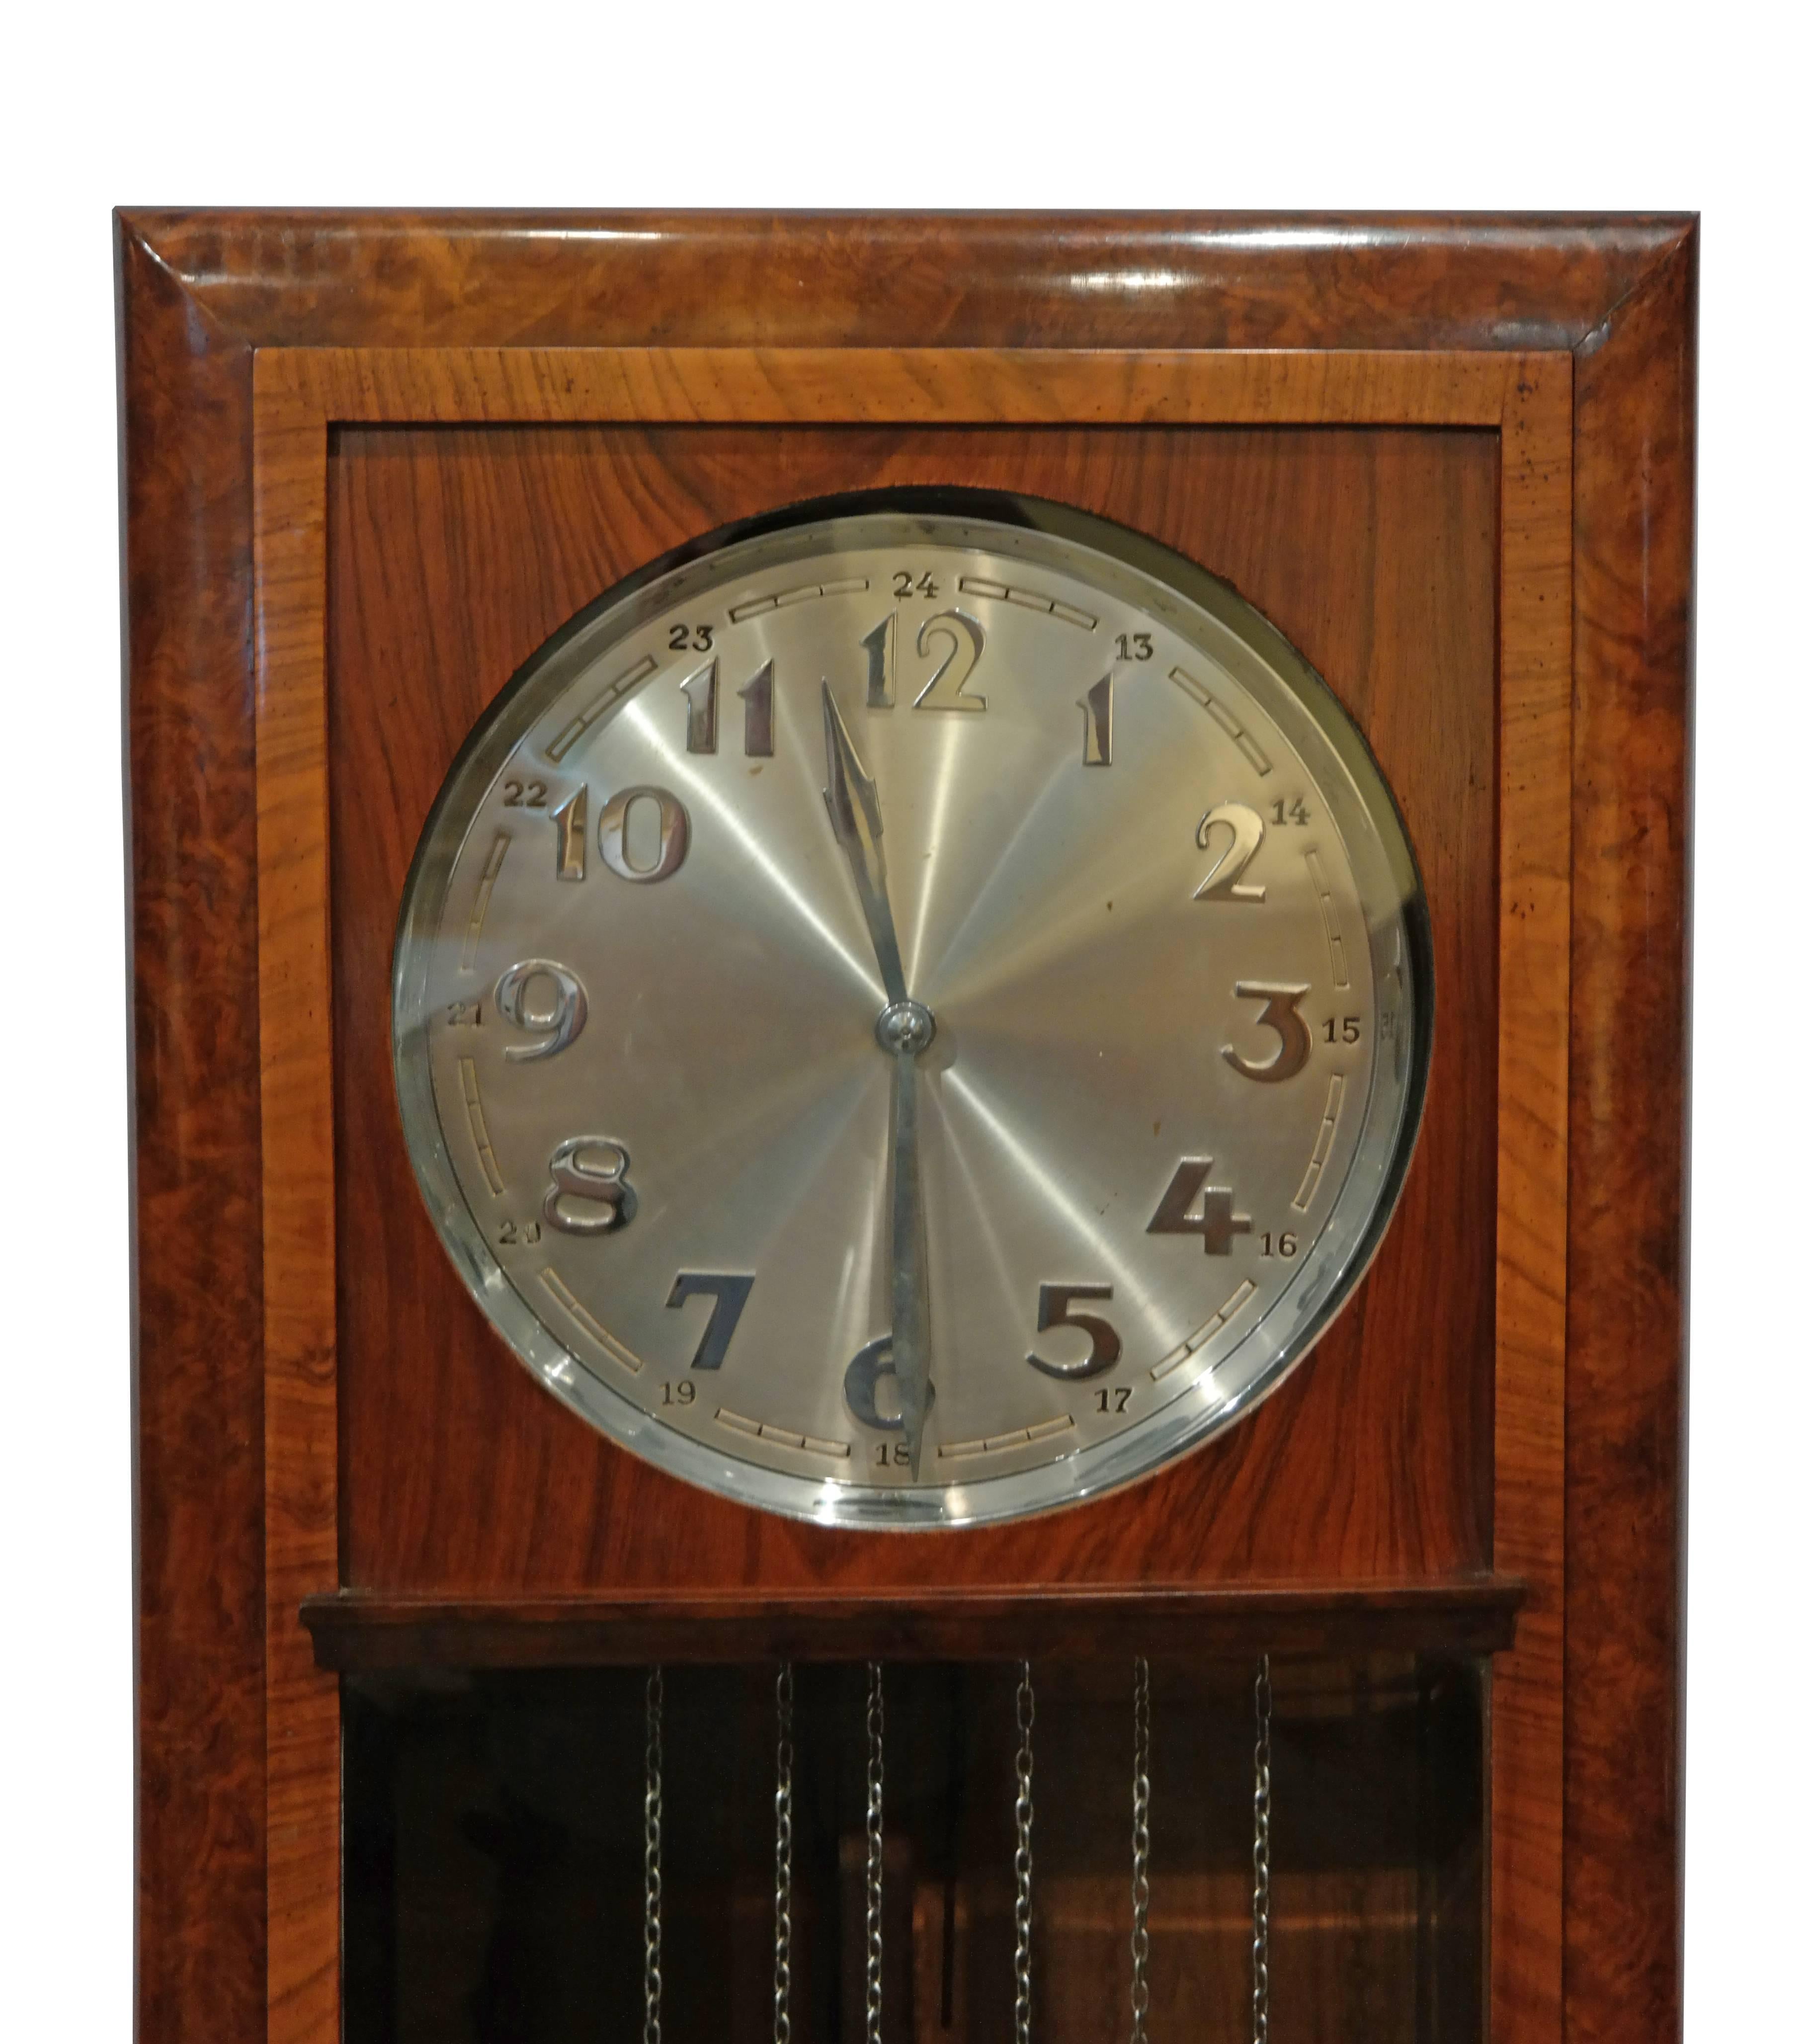 German Art Deco grandfather clock, with stainless dial and highly decorative case in walnut and rosewood. Clock has been recently cleaned and is in good working order.